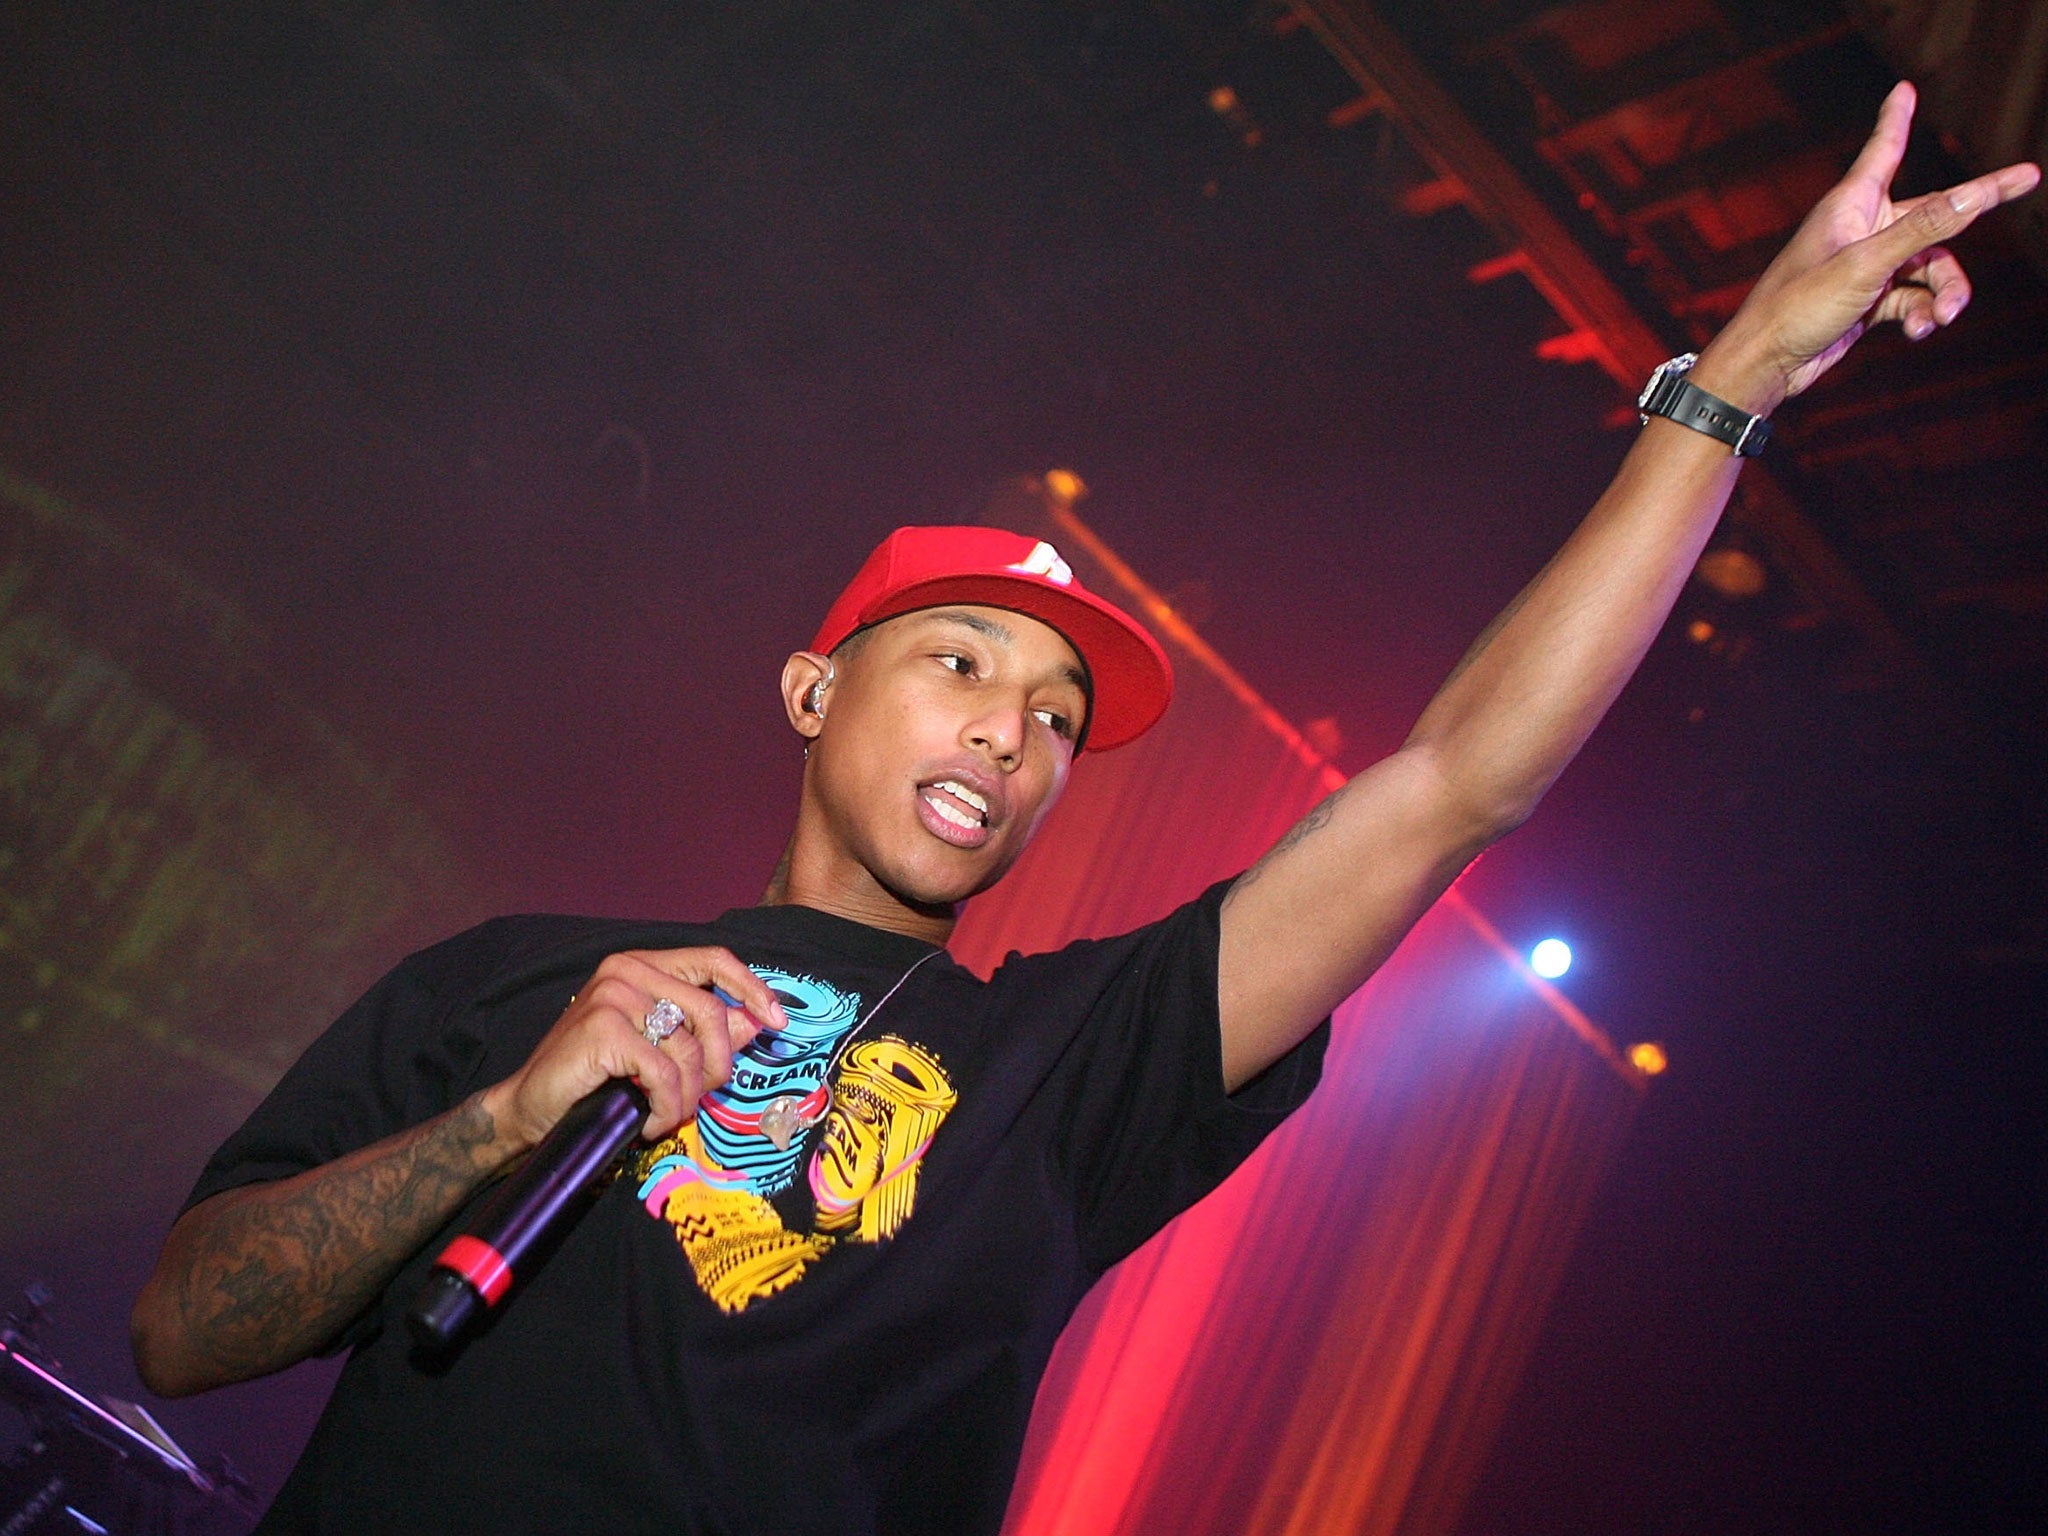 Pharrell Williams will perform alongside the likes of Katy Perry and Rudimental at the Brit Awards 2014